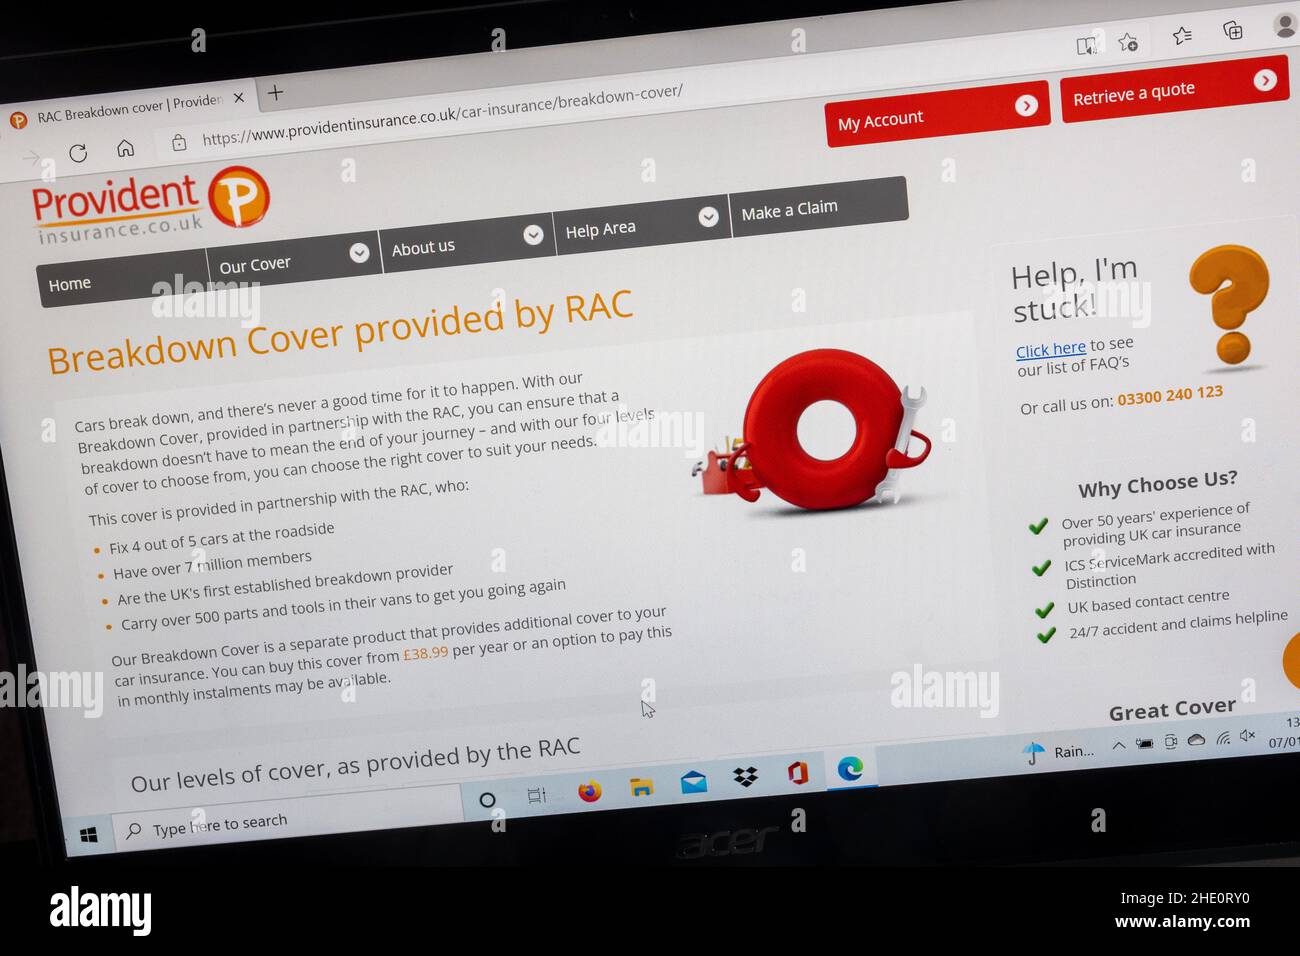 Provident Insurance Company website on a laptop computer, UK. Breakdown Cover provided by RAC. Stock Photo